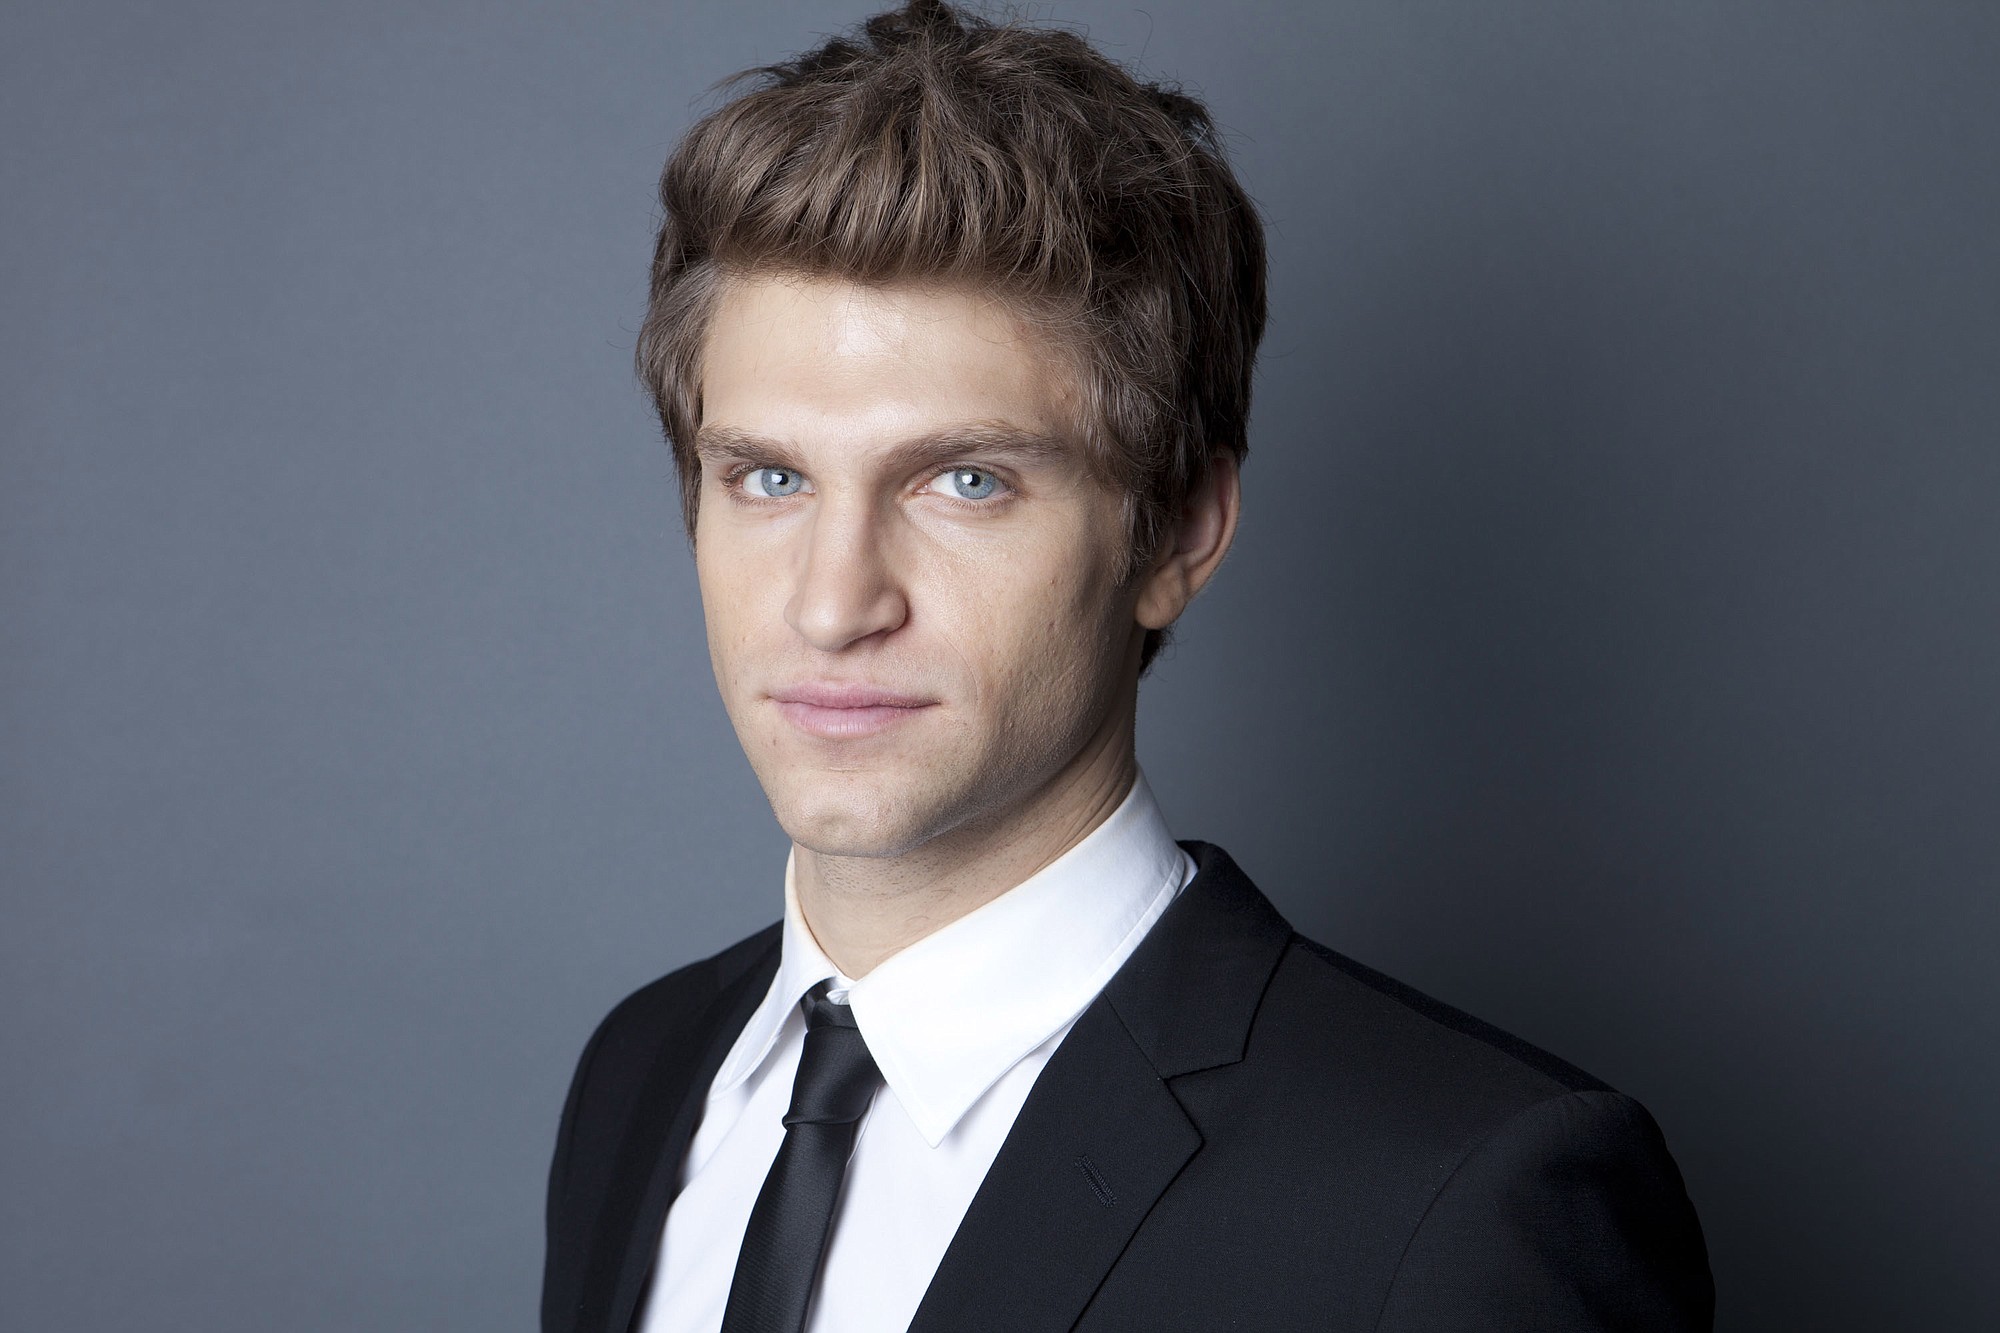 Keegan Allen is a cast member on ABC Family's &quot;Pretty Little Liars,&quot; which airs Tuesdays.